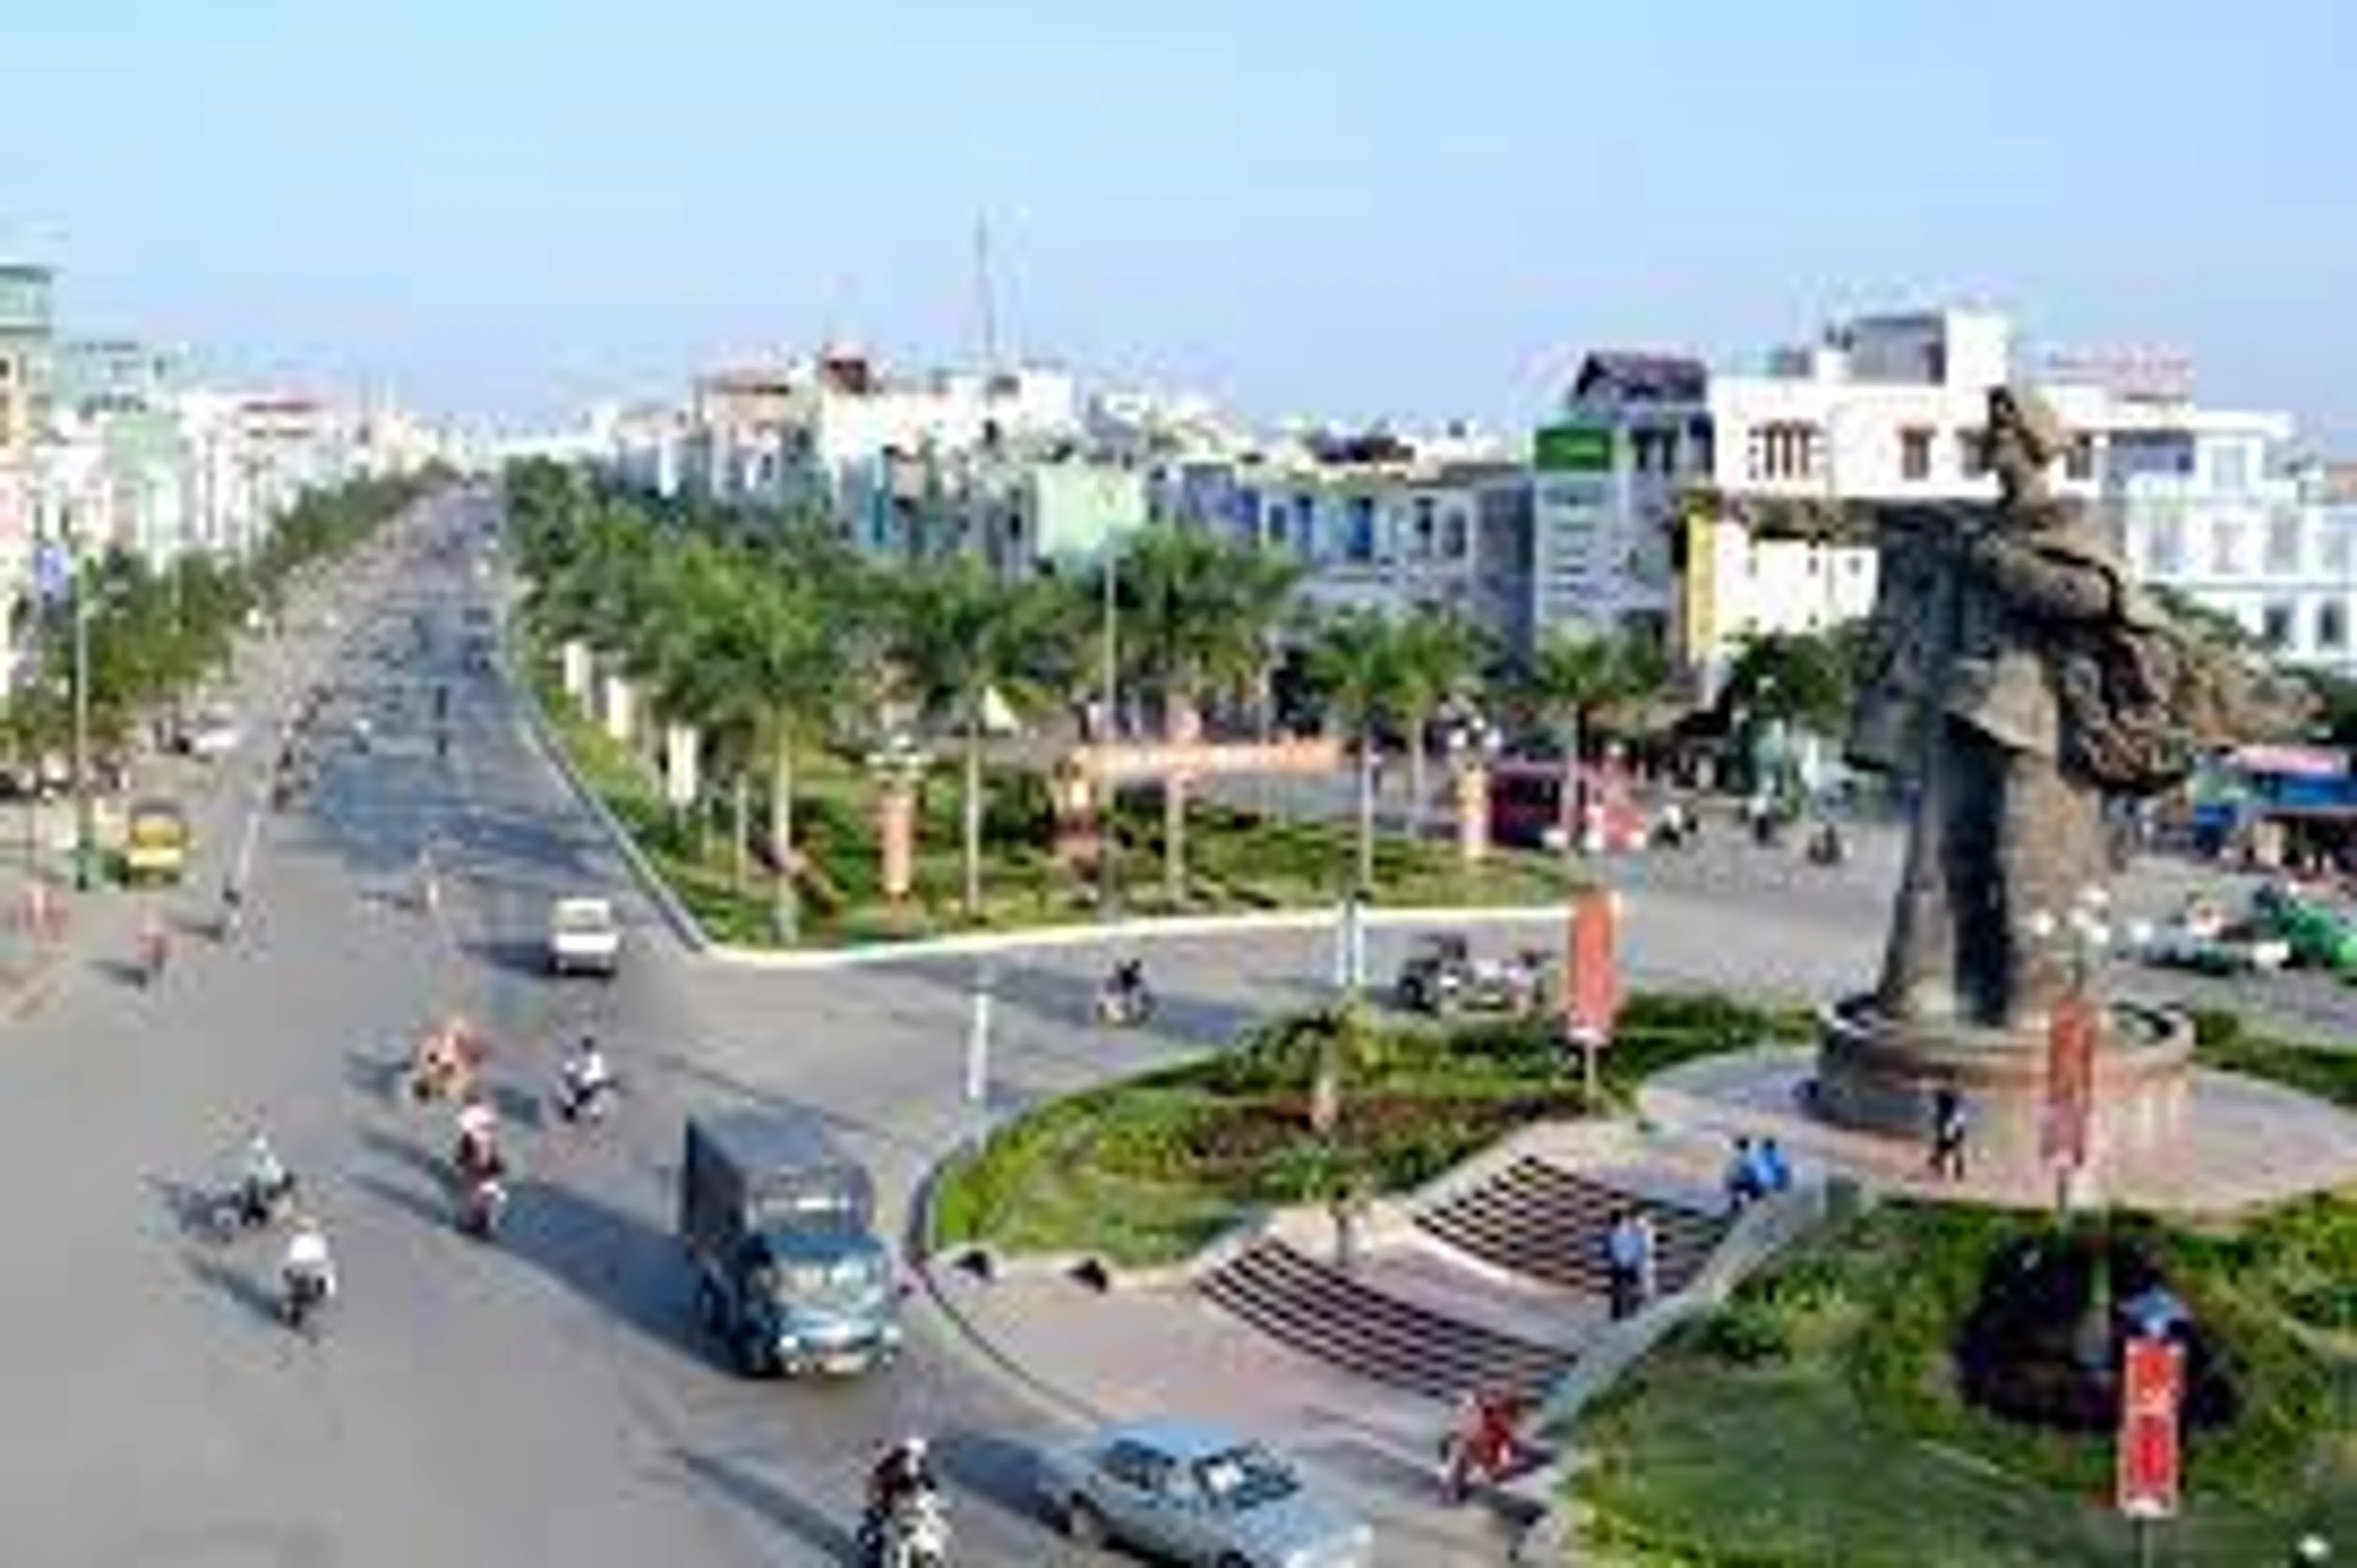 Thanh Khe District